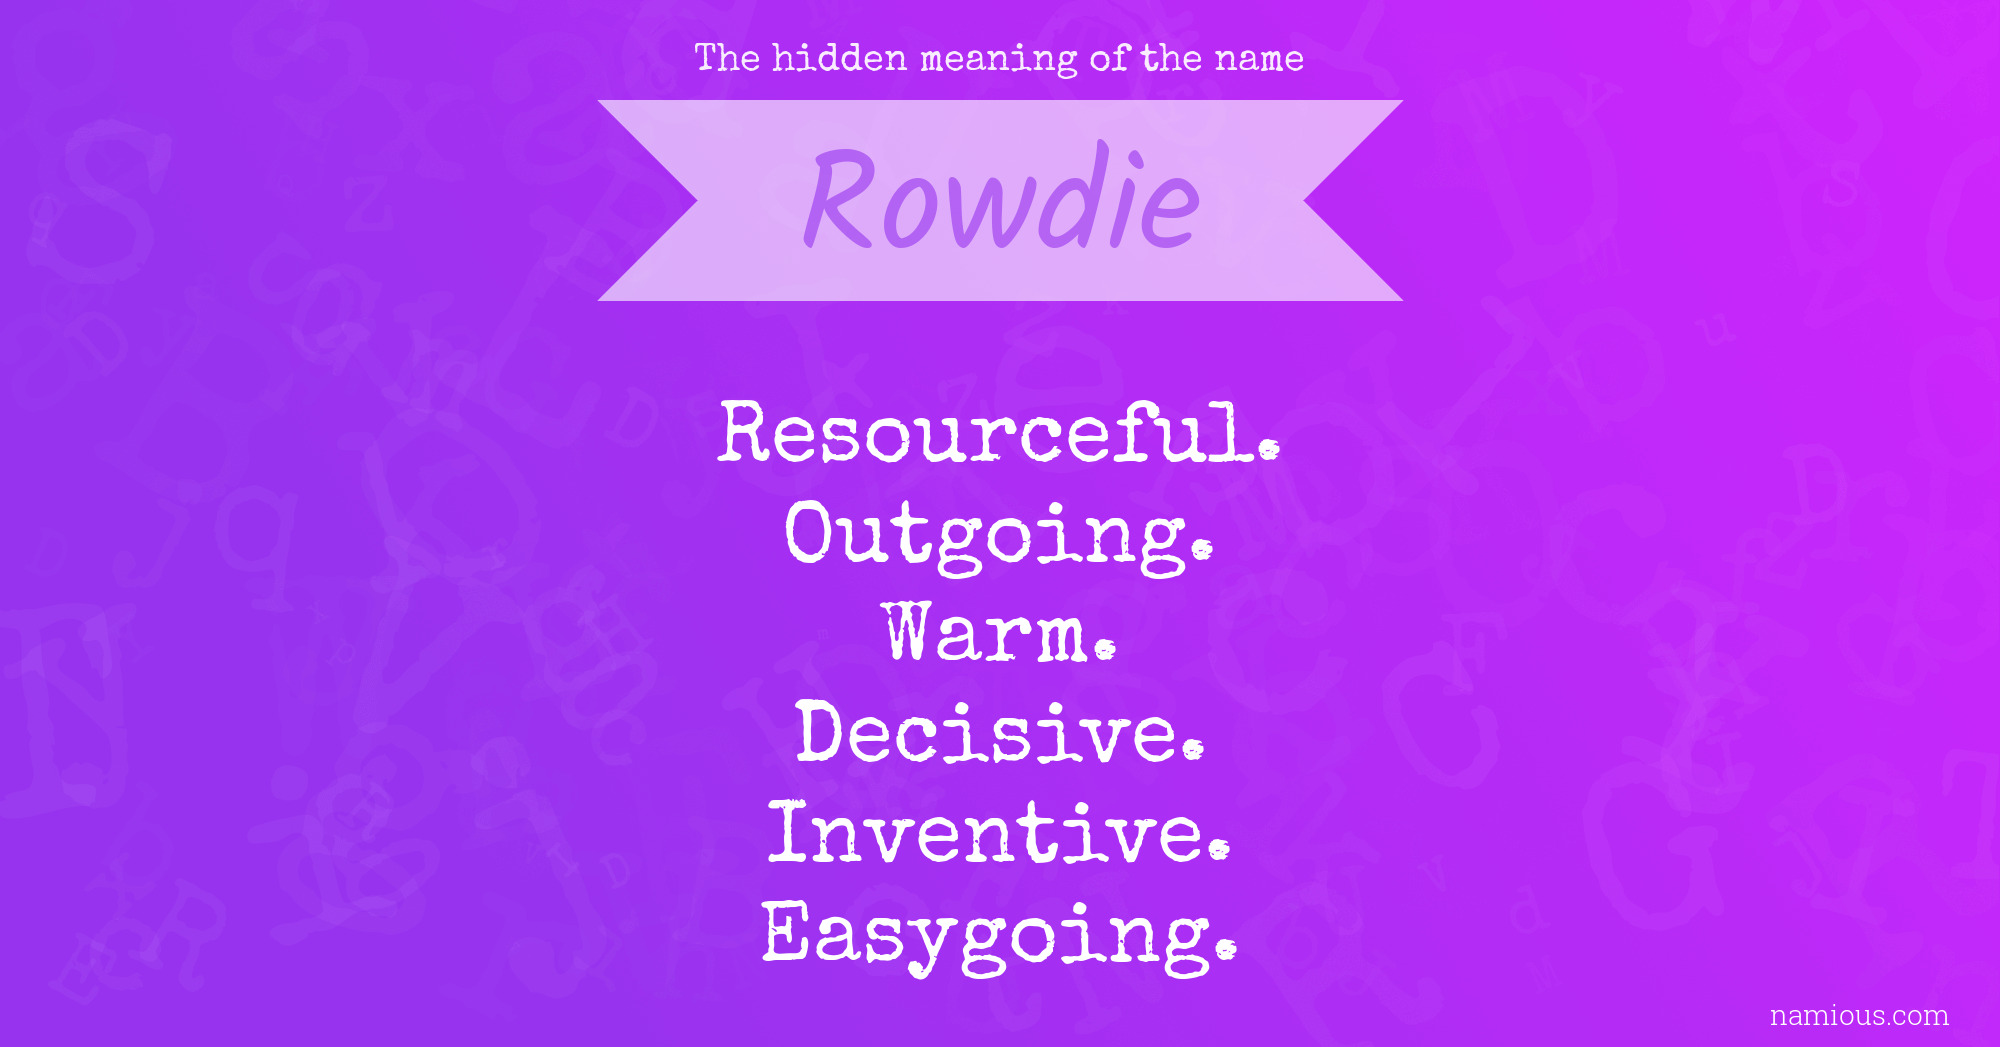 The hidden meaning of the name Rowdie